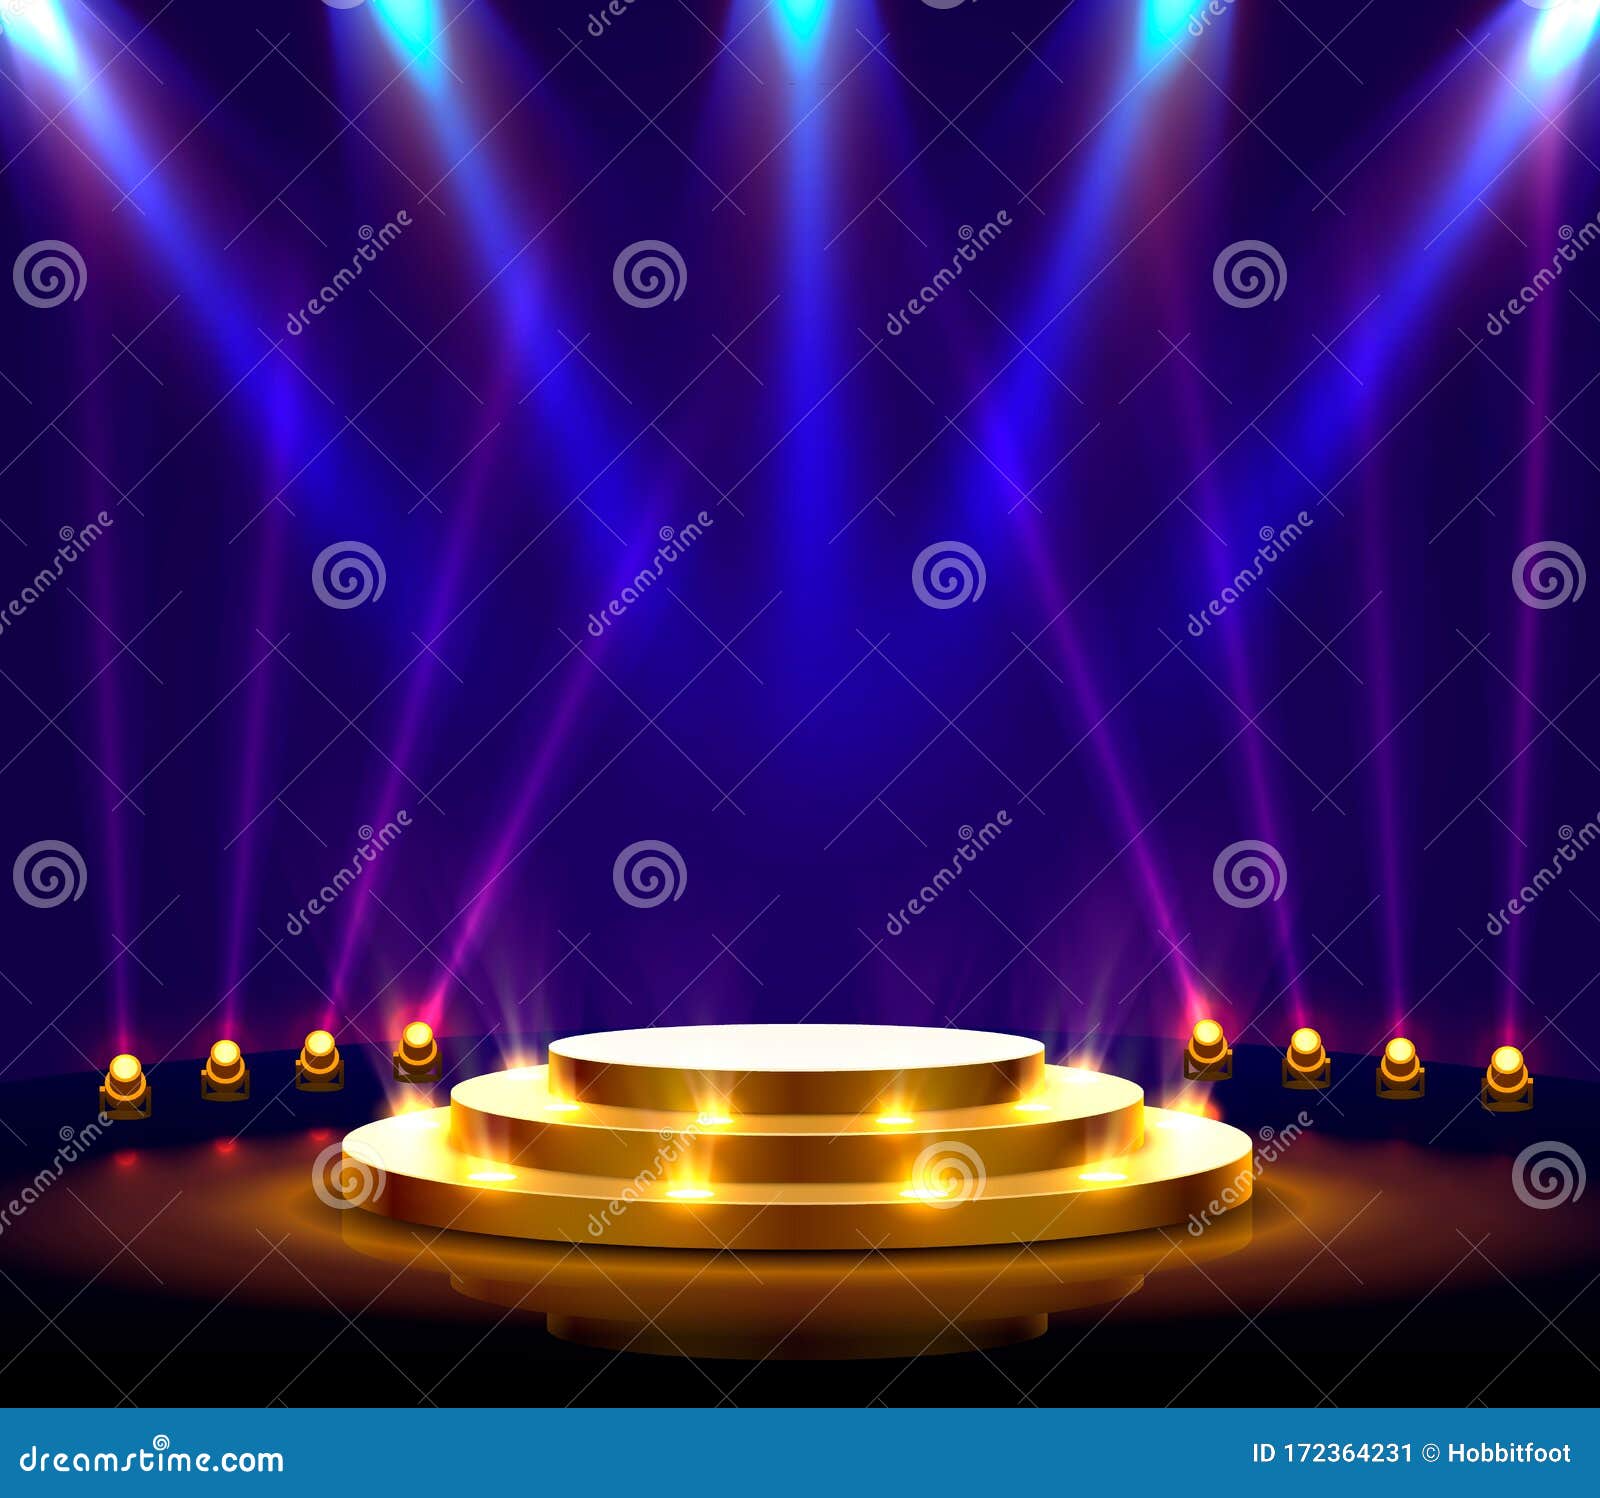 stage podium with lighting, stage podium scene with for award ceremony on blue background.